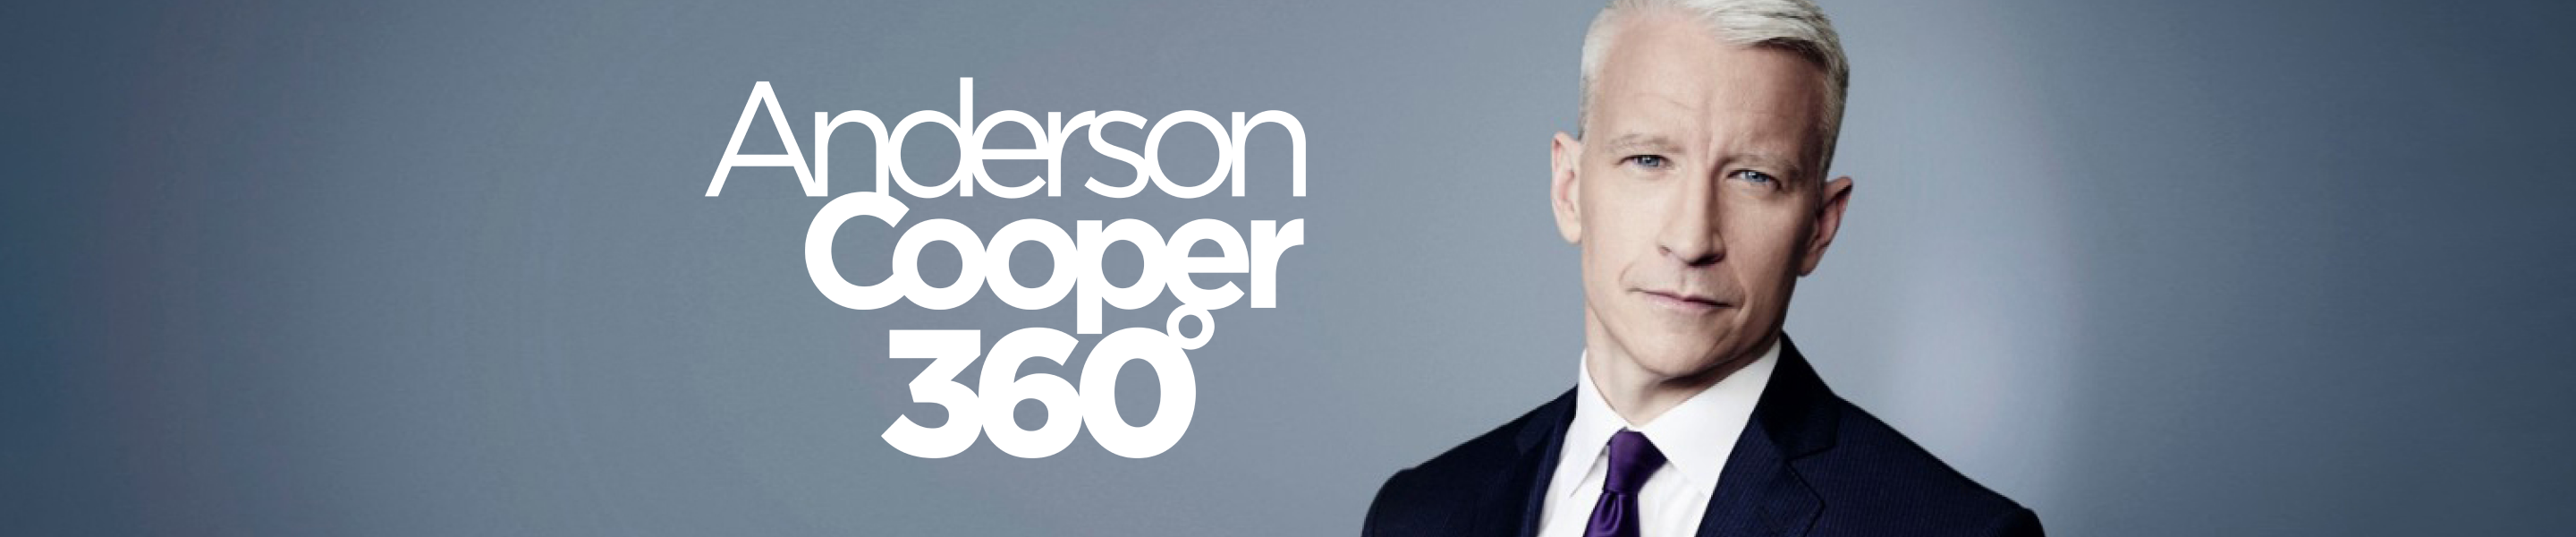 official anderson cooper 360 collection-image